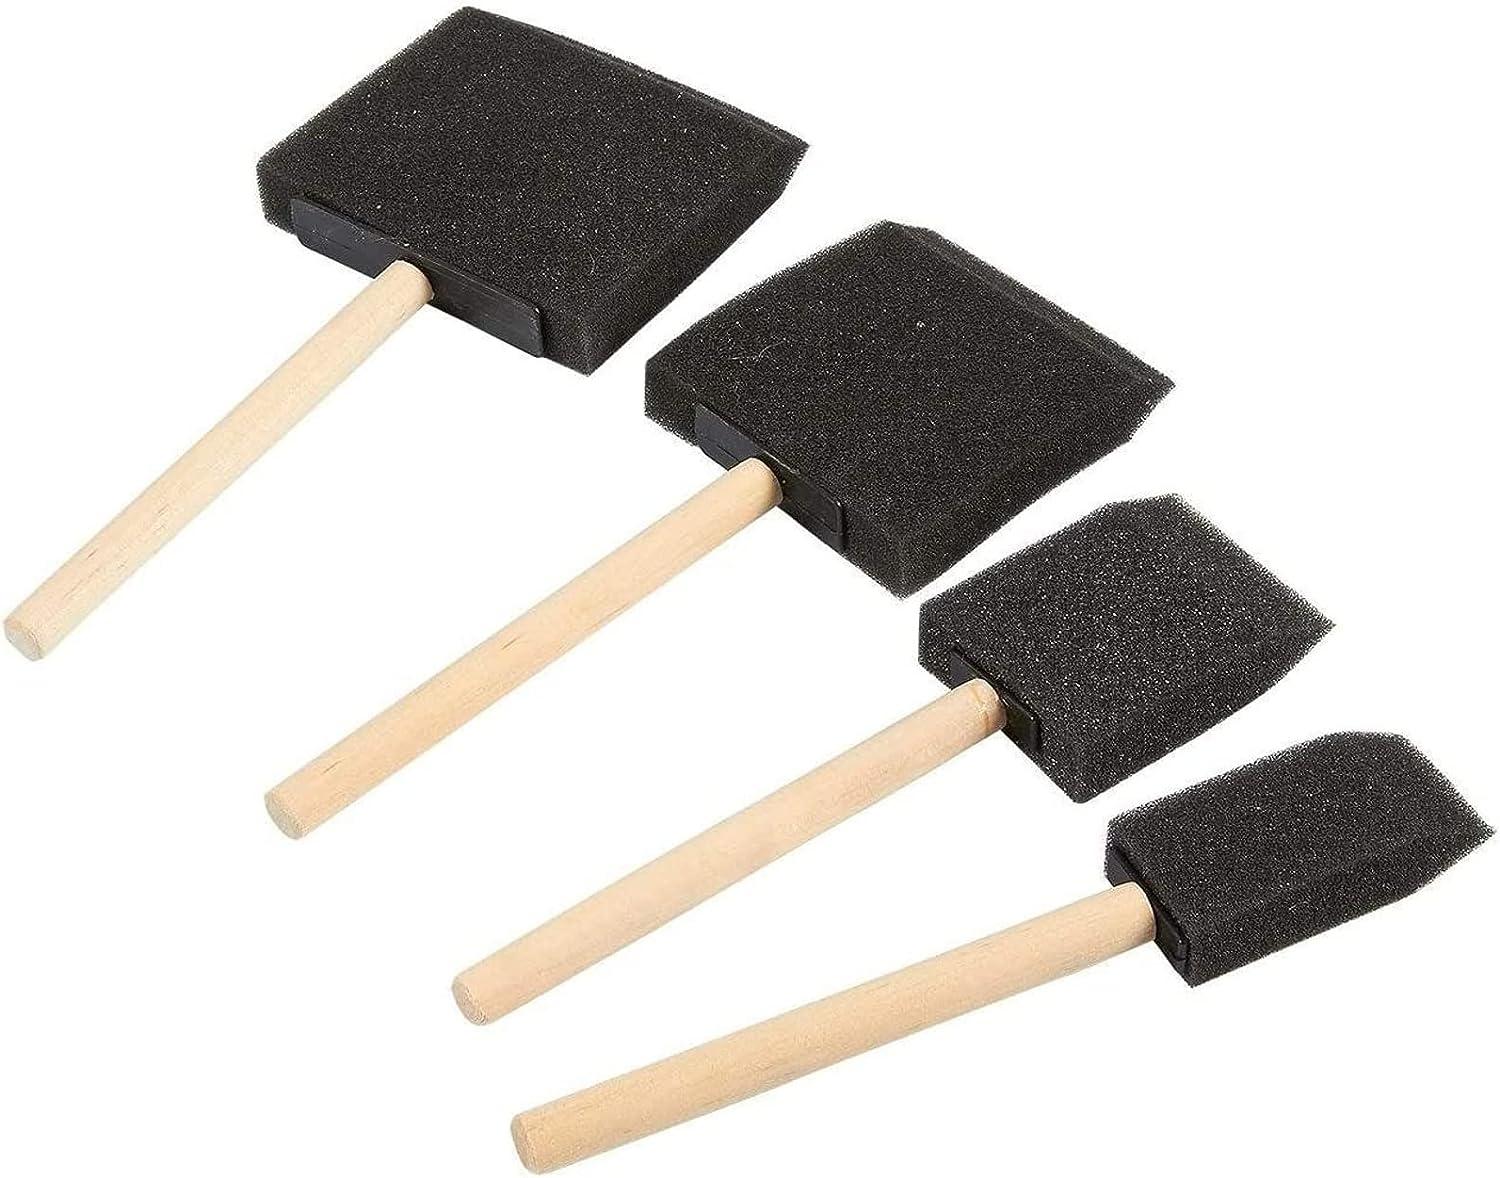 Oodles of Foam Brushes Pack of 40, Assorted Sizes